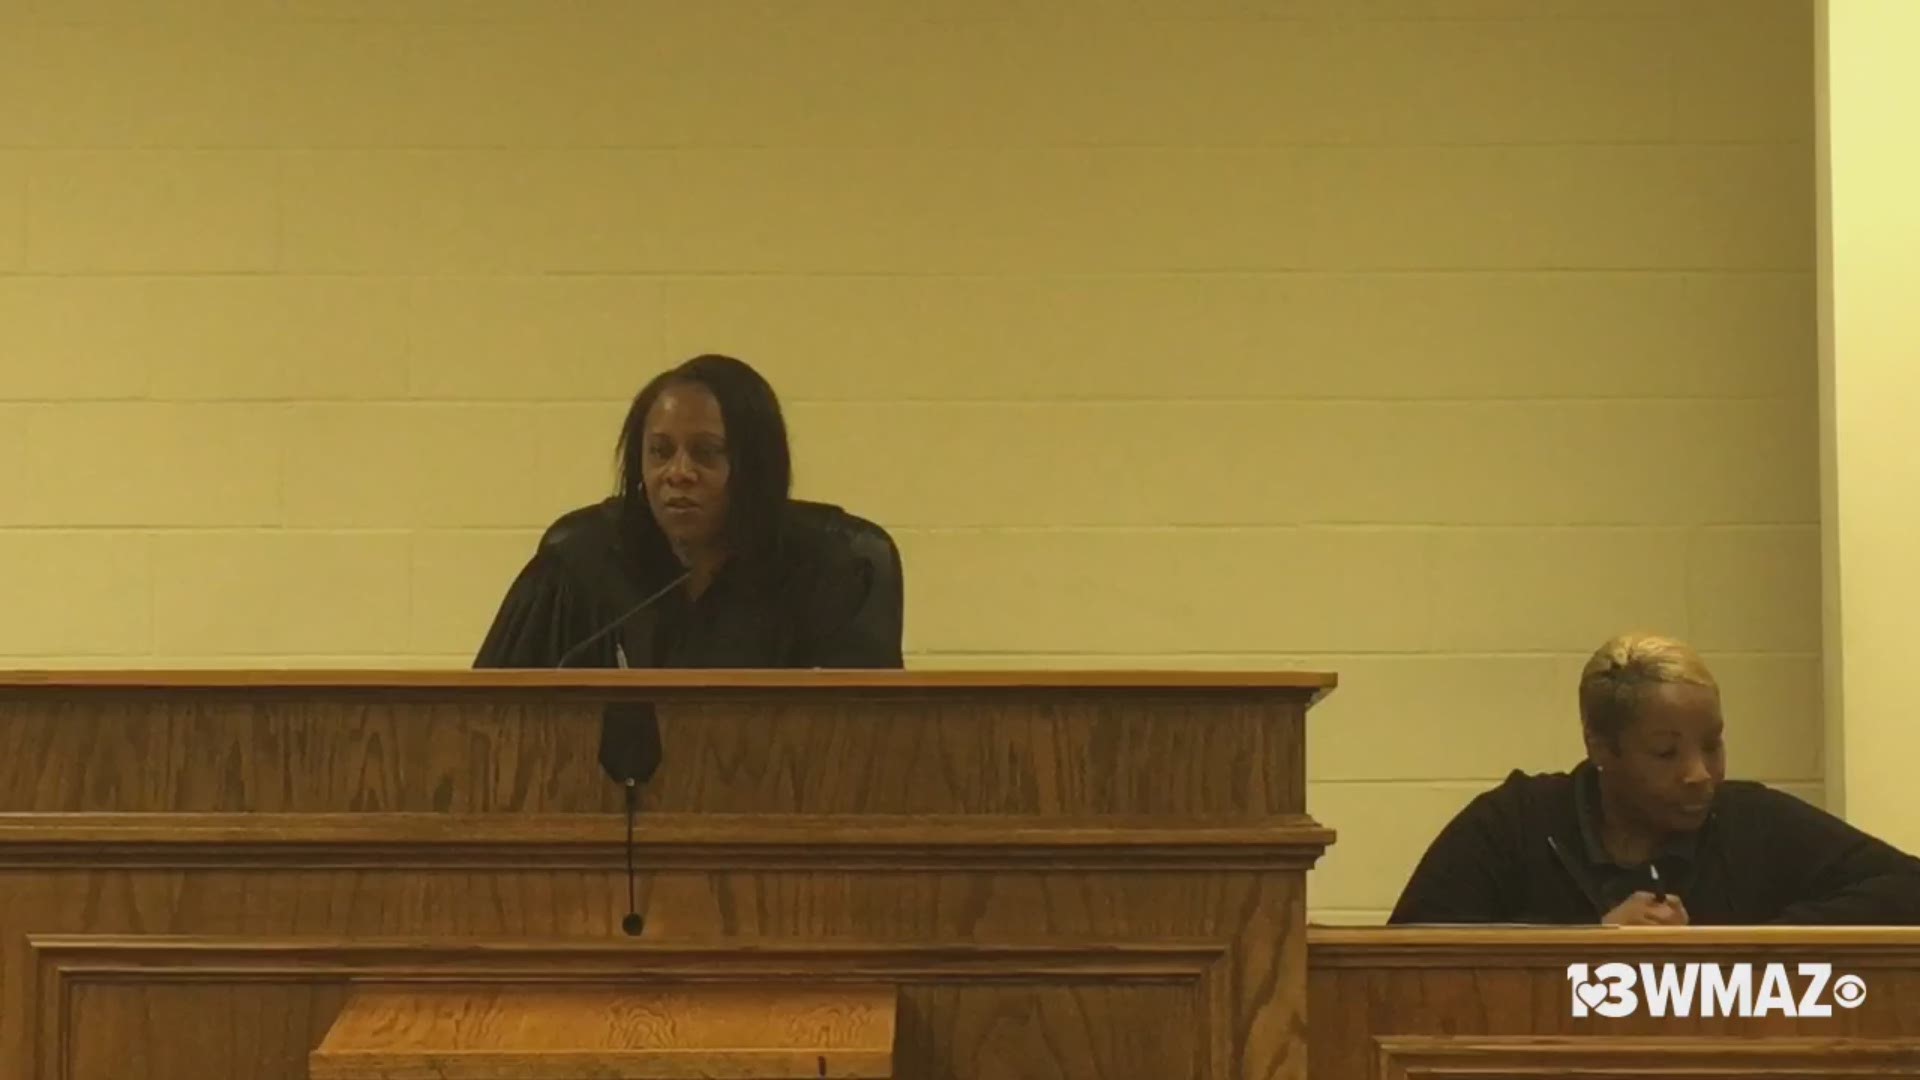 Tomeka Blash is charged with one count of voluntary manslaughter and her bond is set at $35,000. Under her special condition bond order, she can't possess firearms, drugs, or alcohol, she can't leave the state.